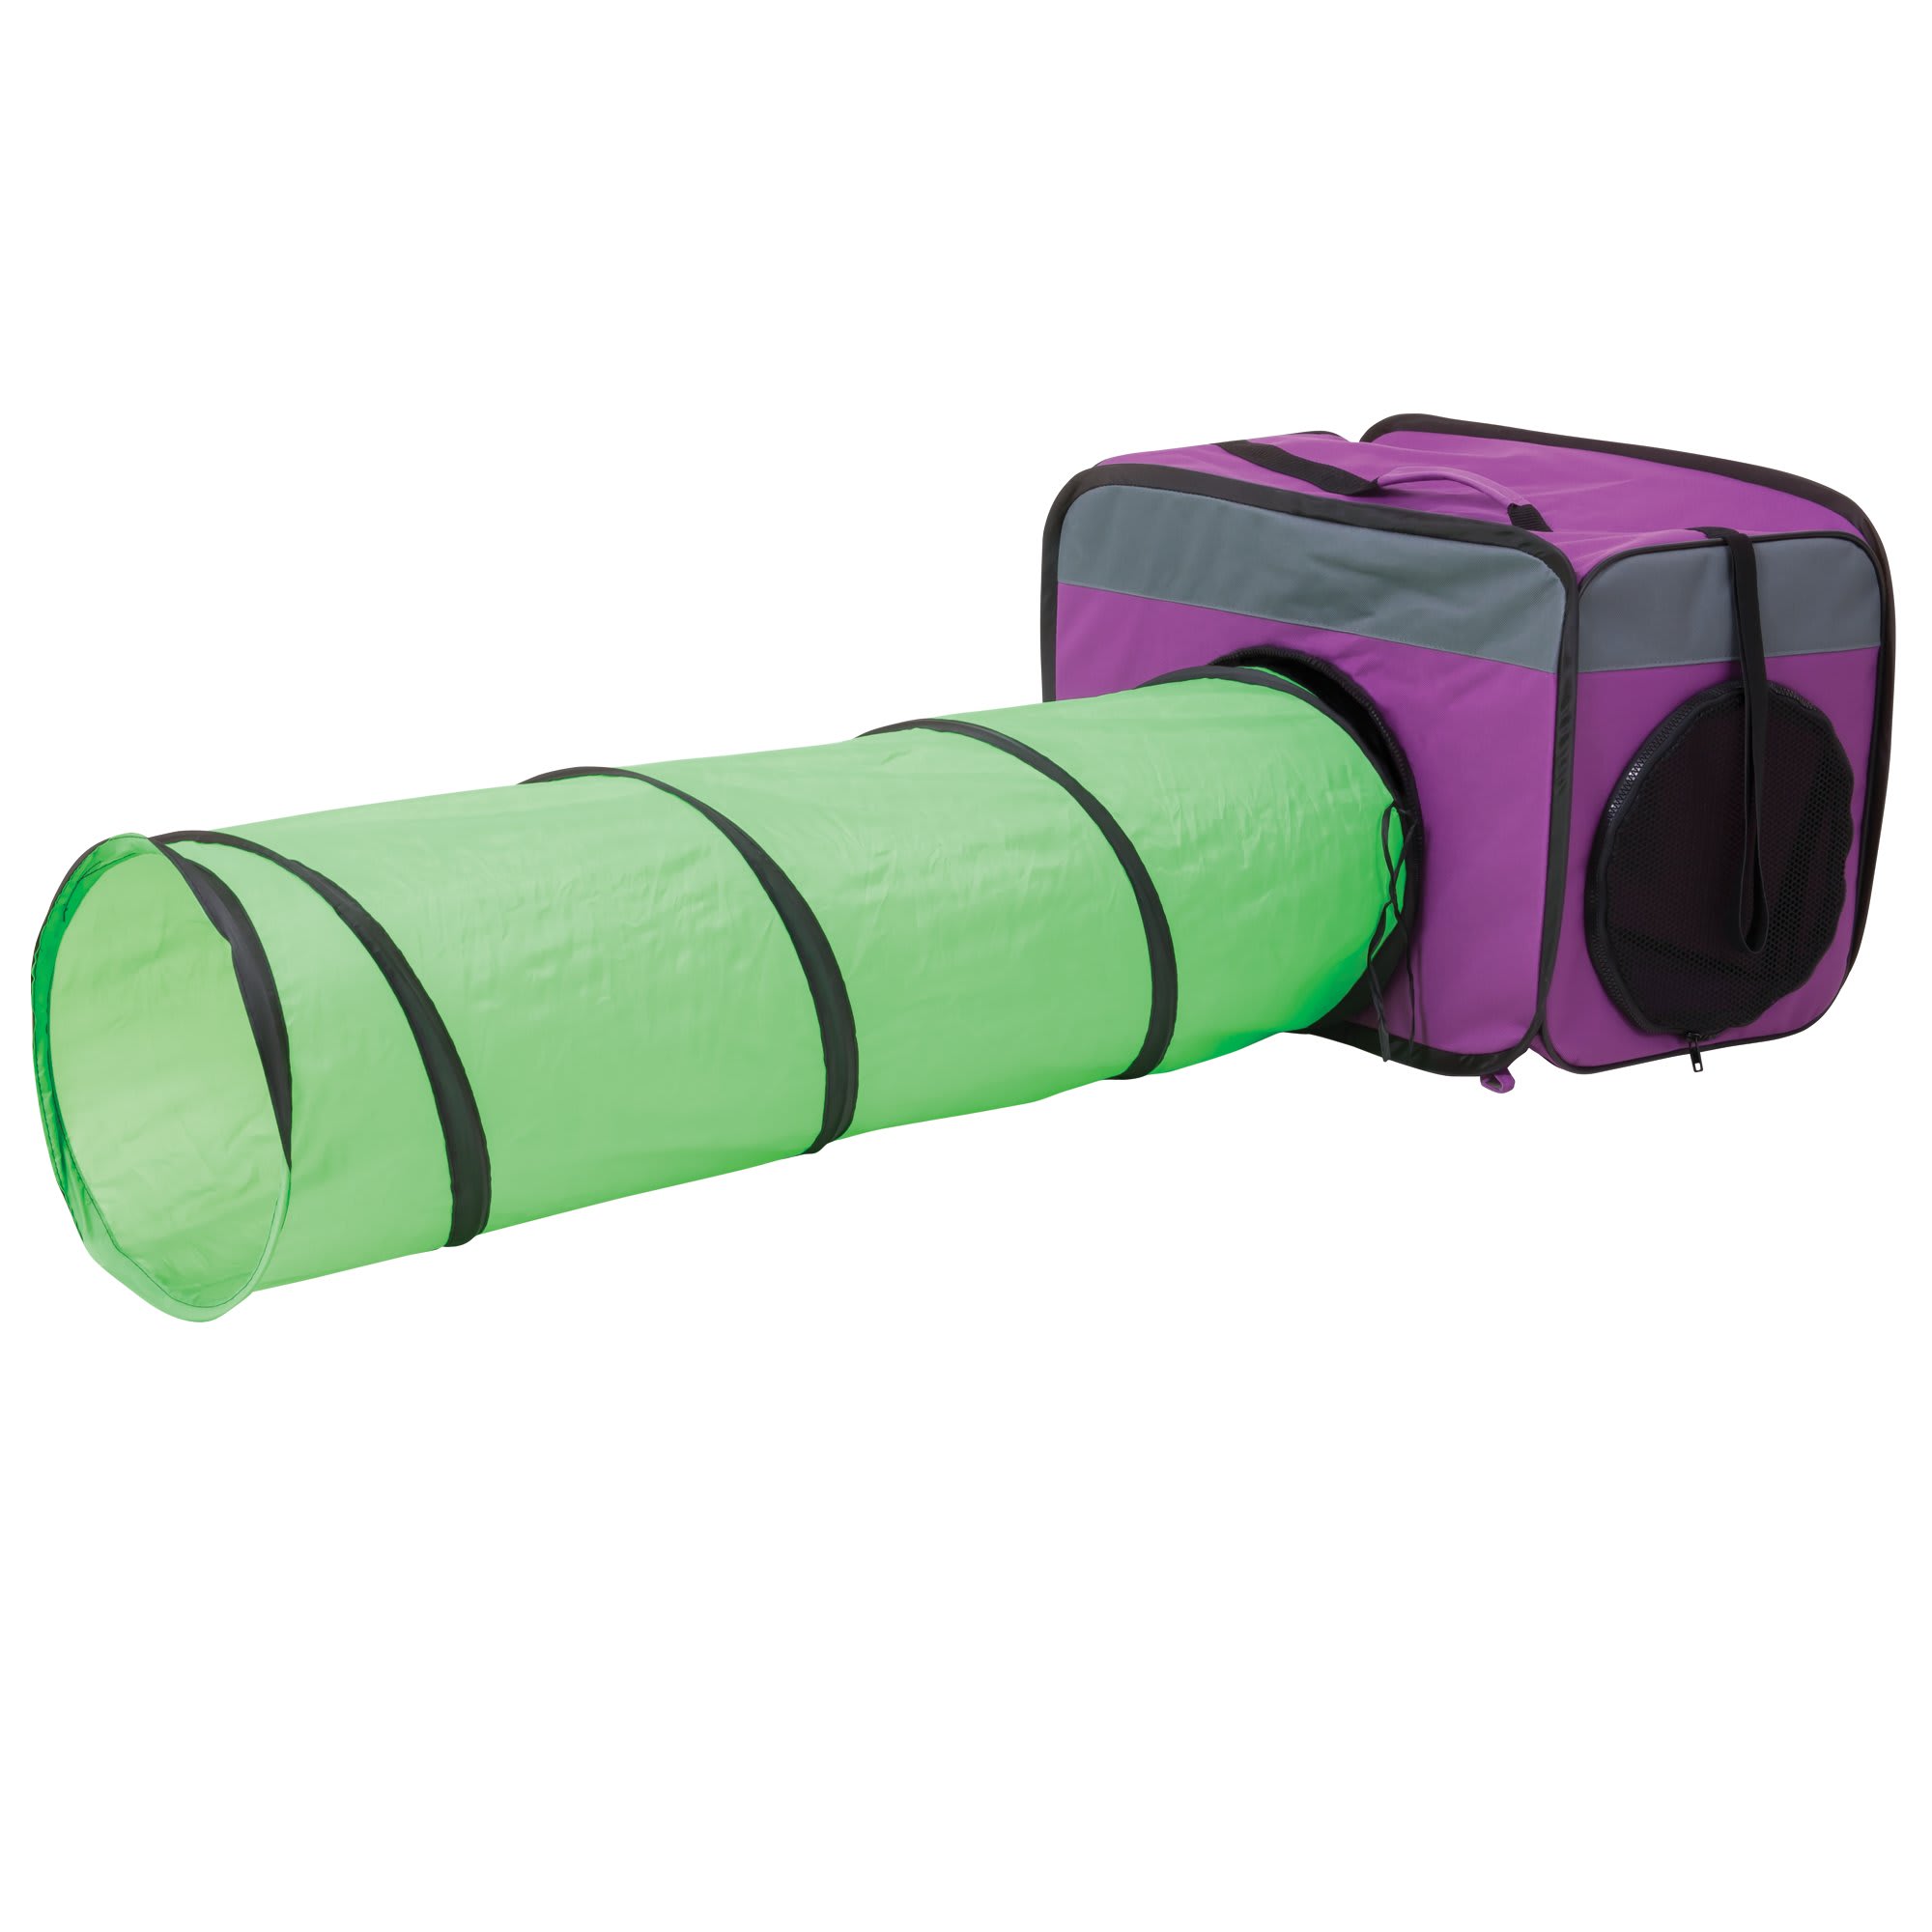 Petmate Jackson Galaxy Base Camp Carrier with Mesh Tunnel 